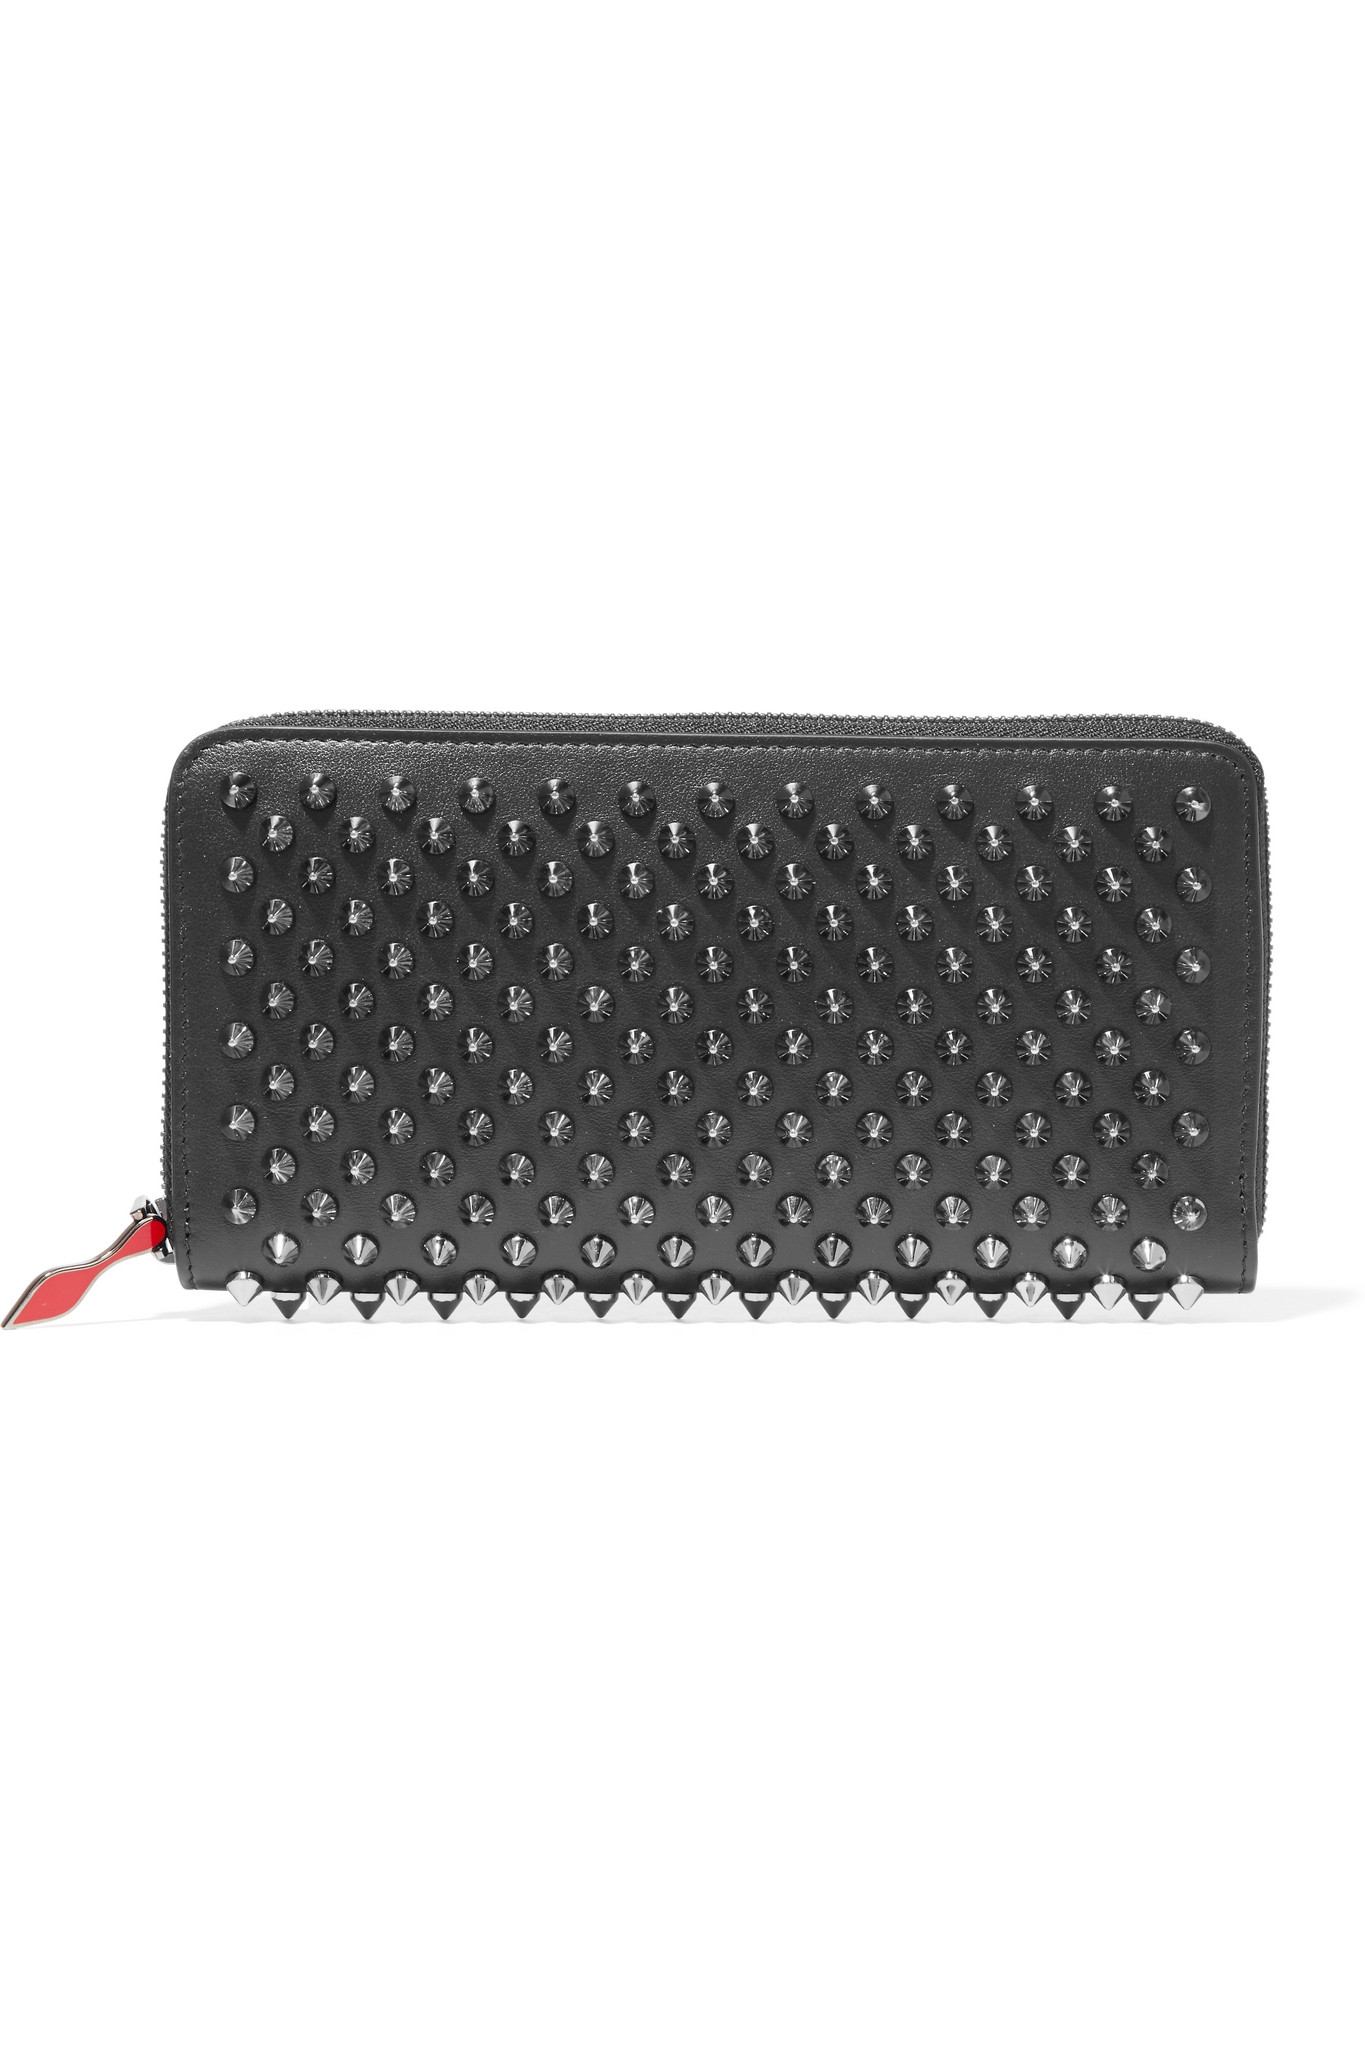 Christian Louboutin Panettone Spiked Leather Wallet in Black - Lyst